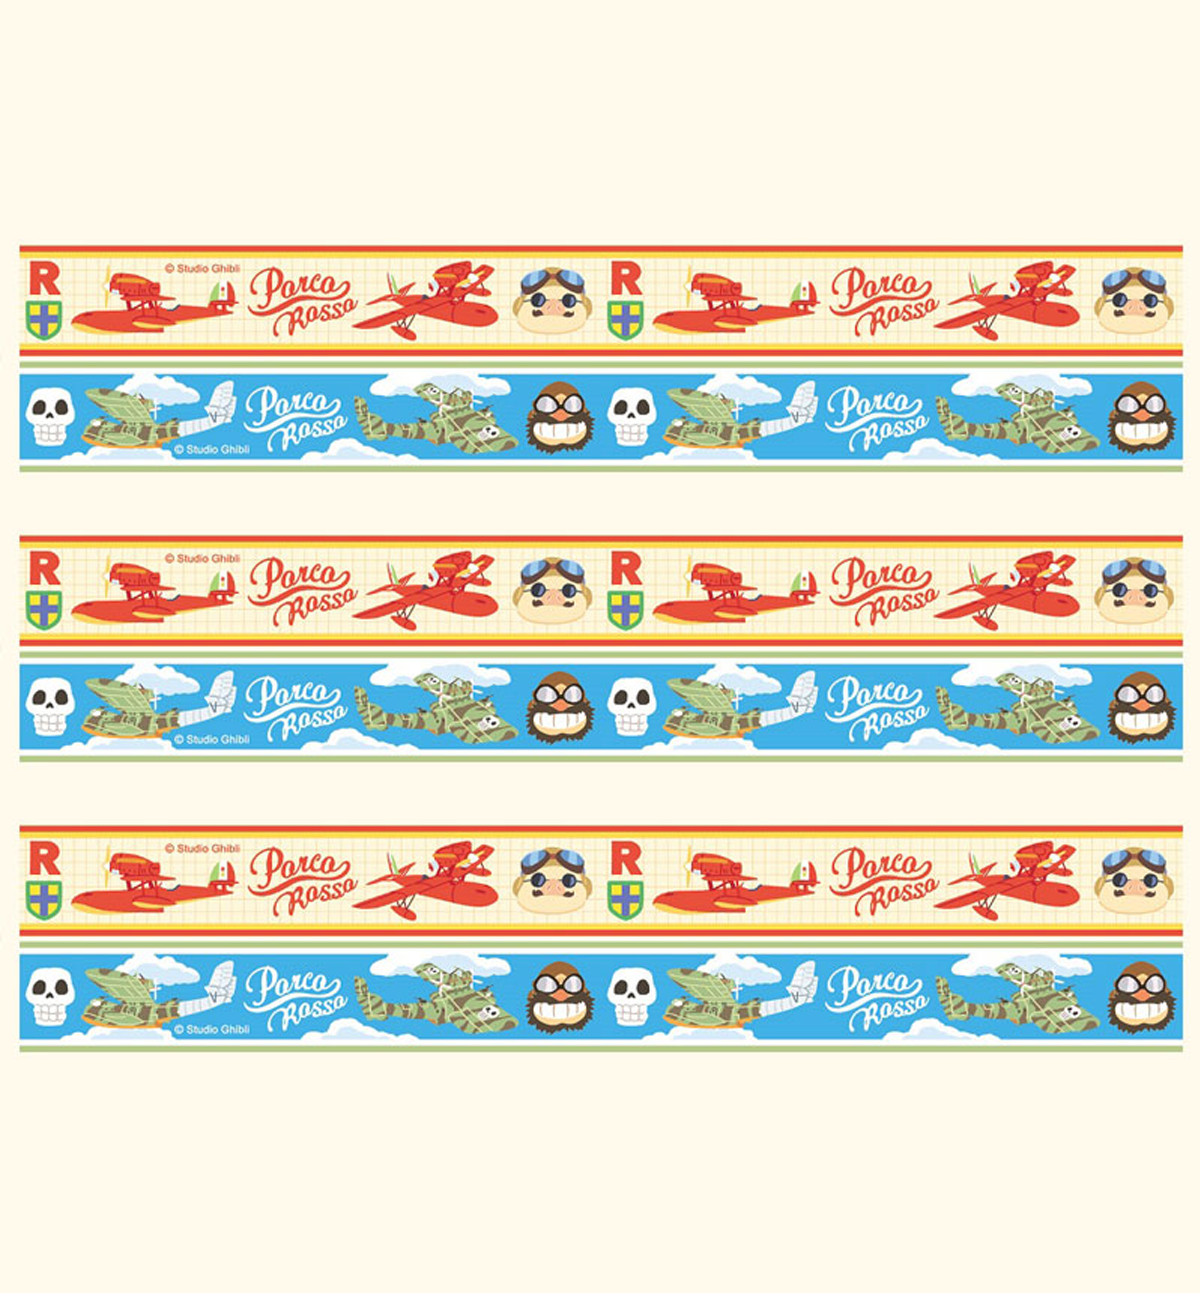 Porco Rosso Washi Tape [2 Rolls]